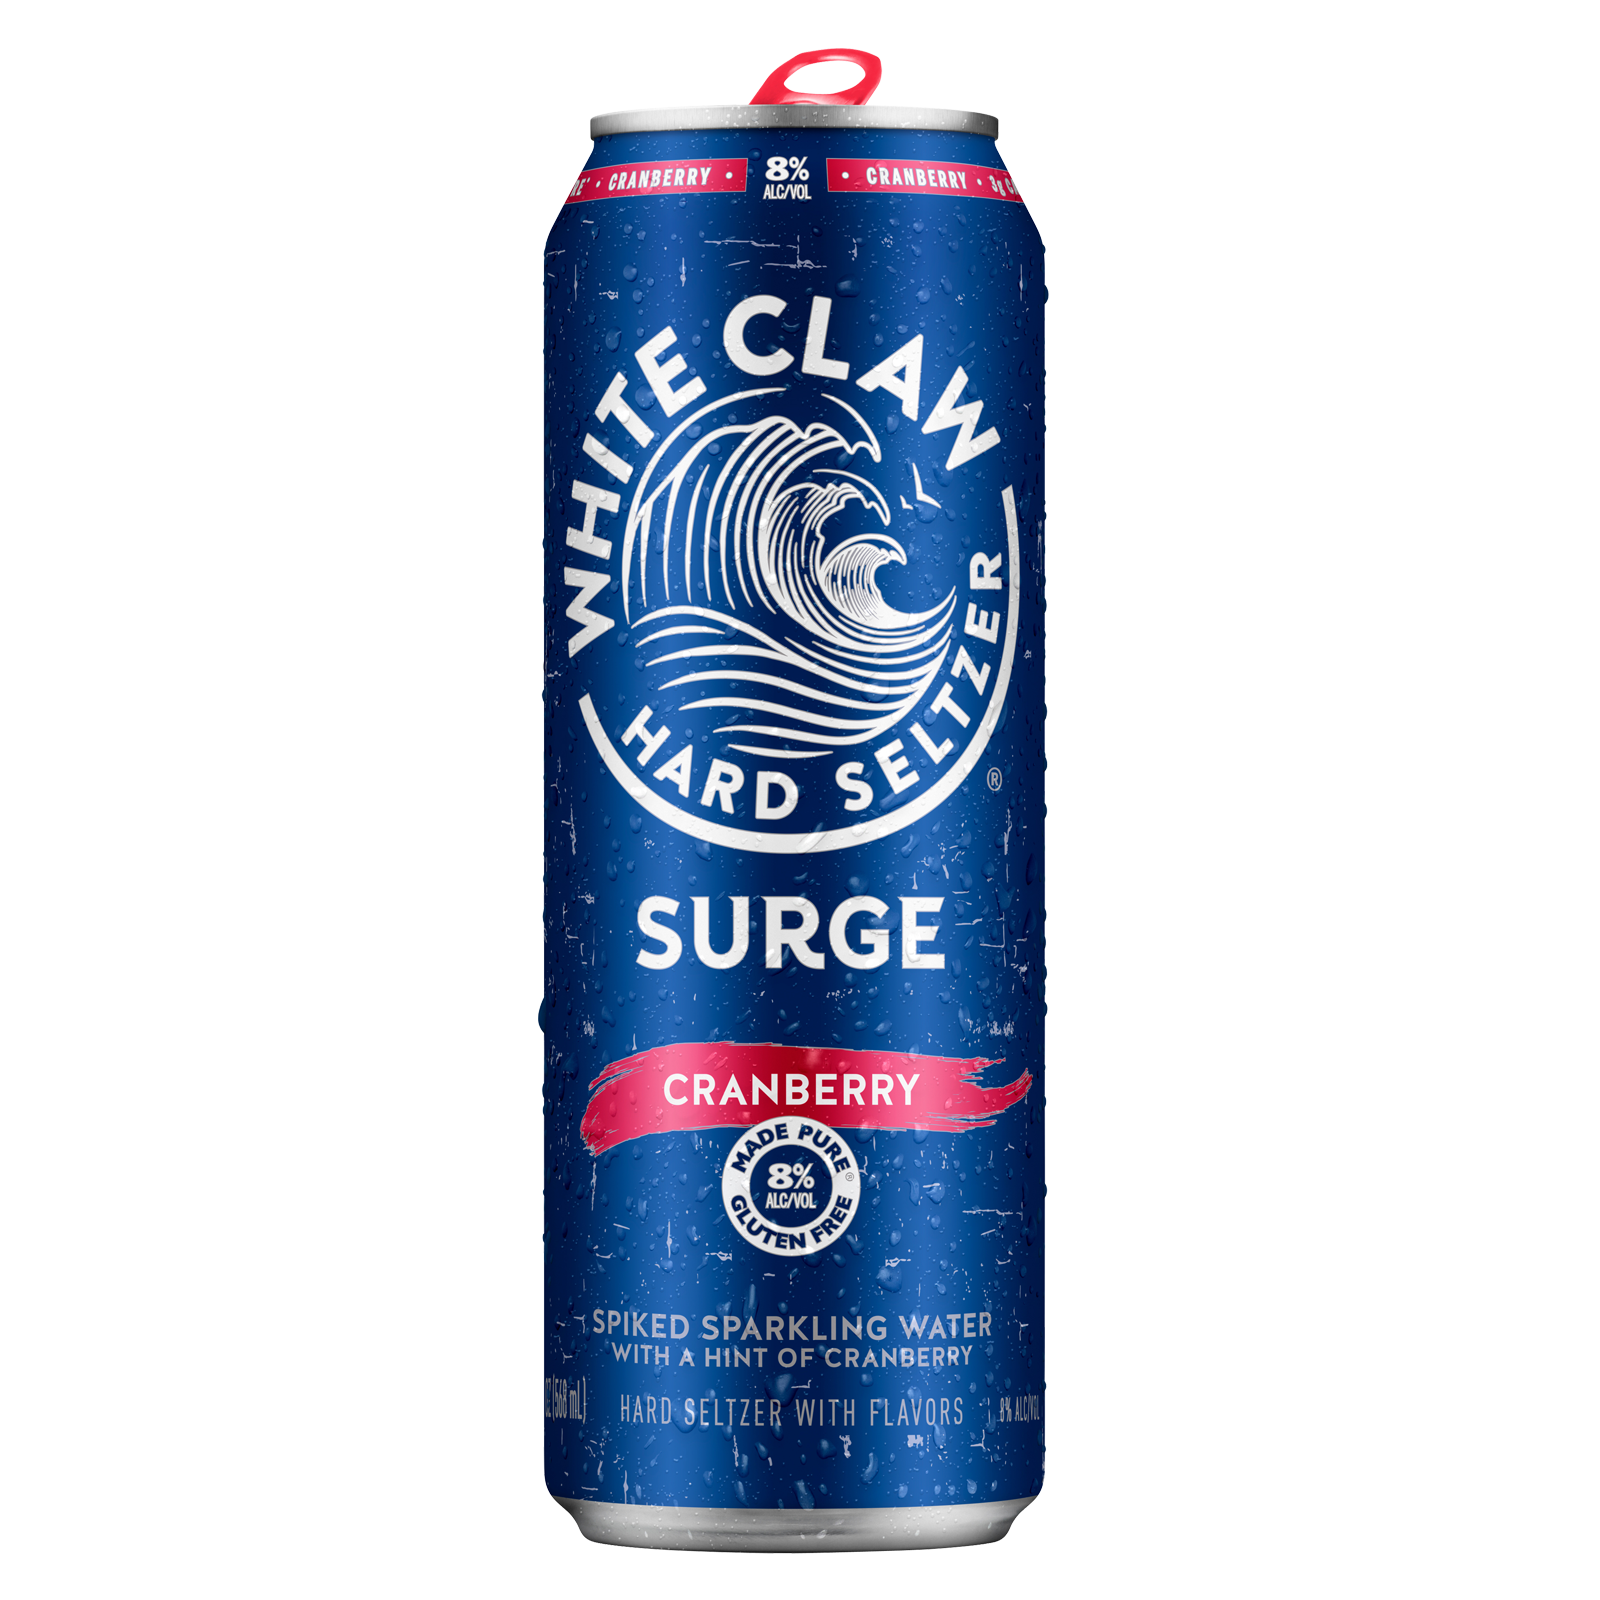 White Claw Hard Seltzer Surge Cranberry Single 19.2oz Can 8% ABV